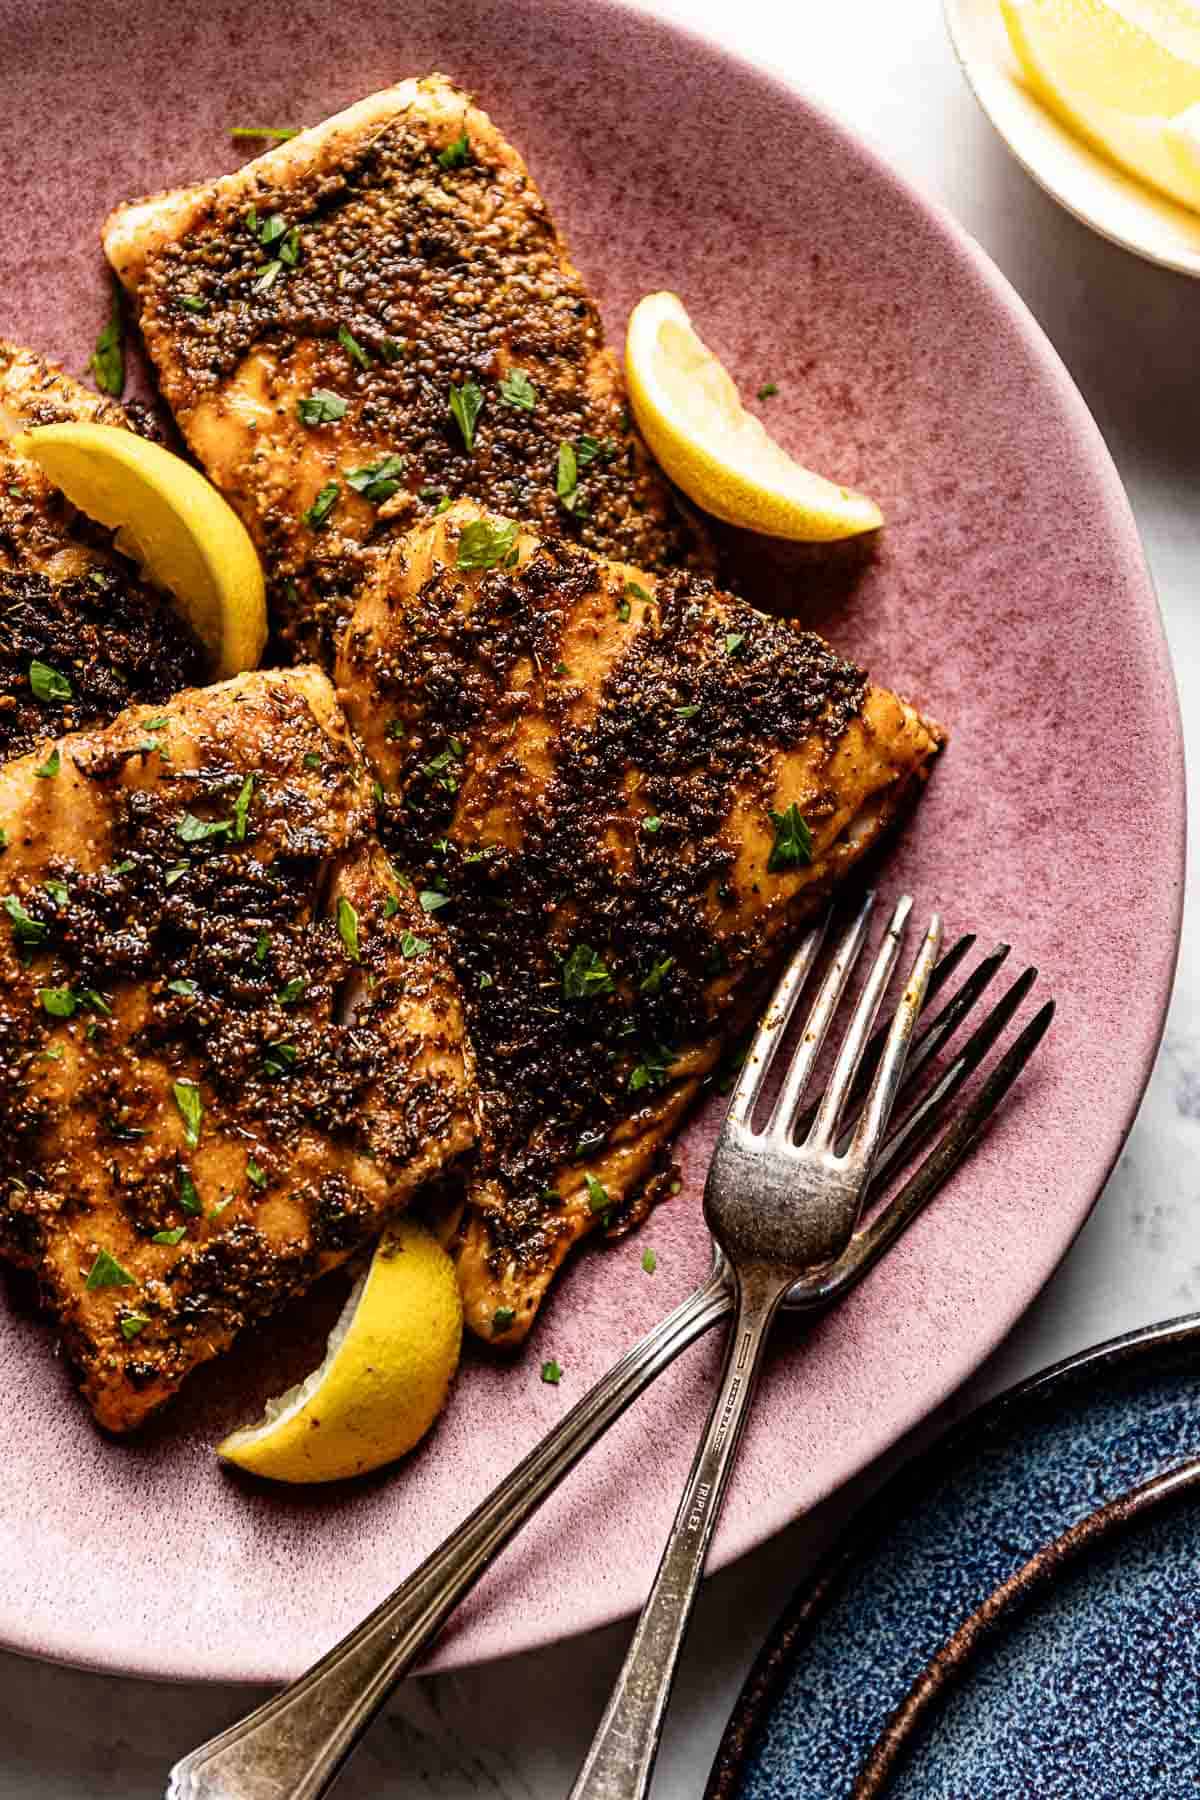 Blackened cod placed on a dish with lemon wedges on the side.